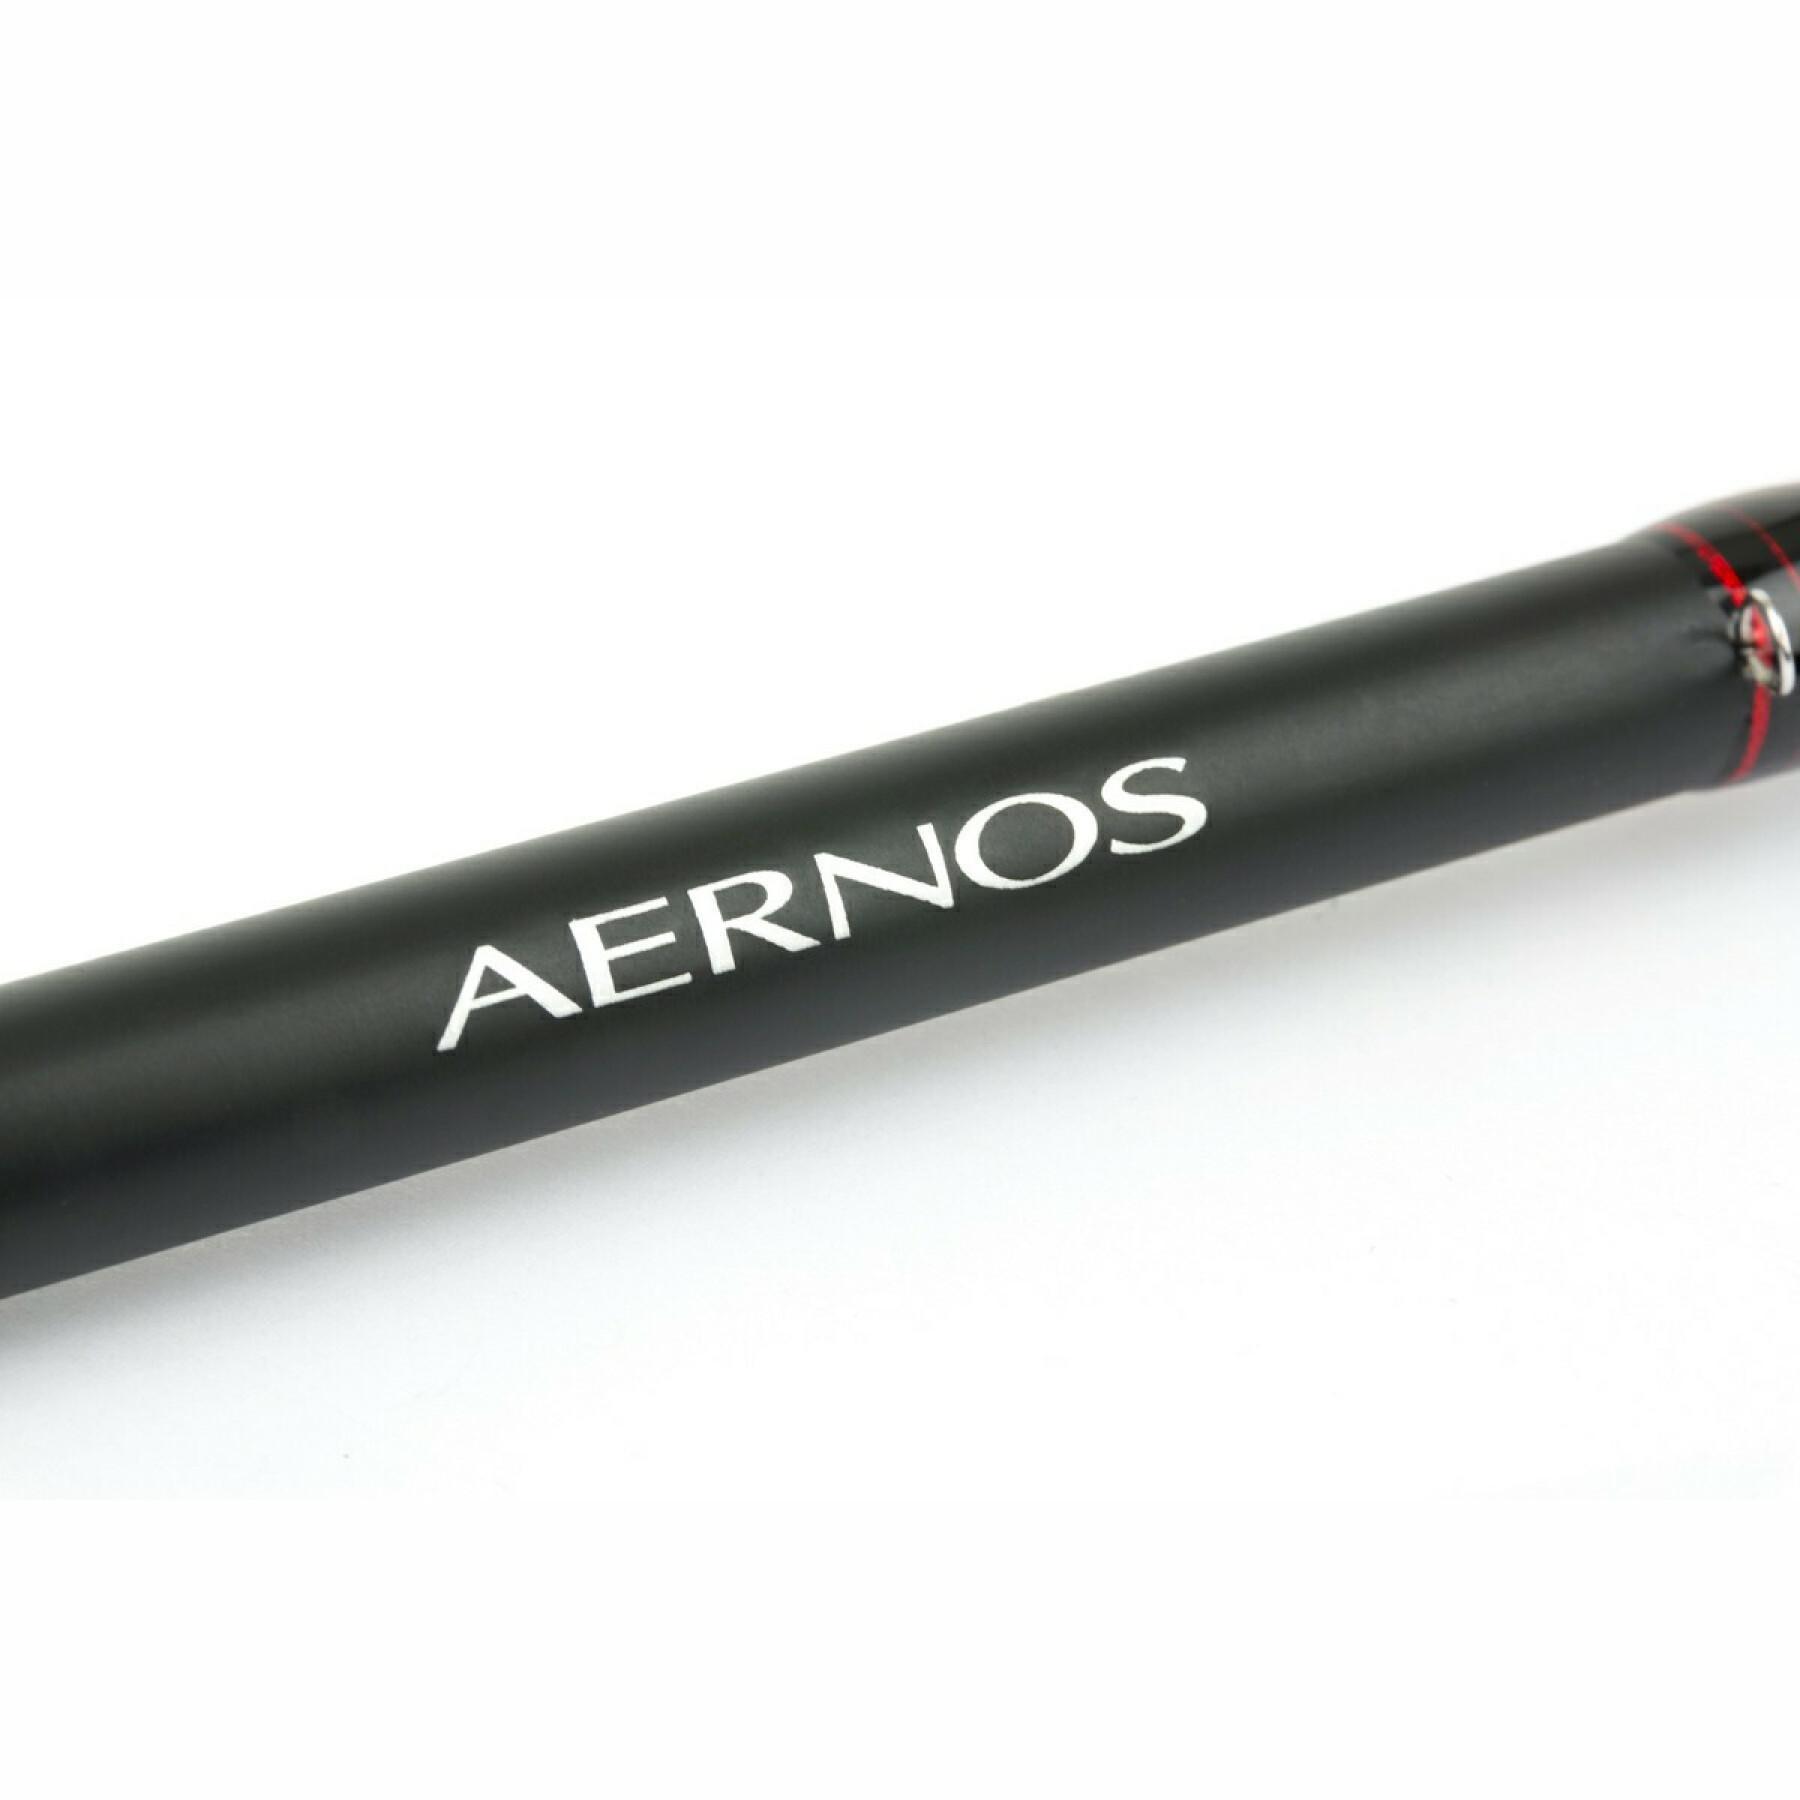 Cane Shimano Aernos Commercial Picter 40g